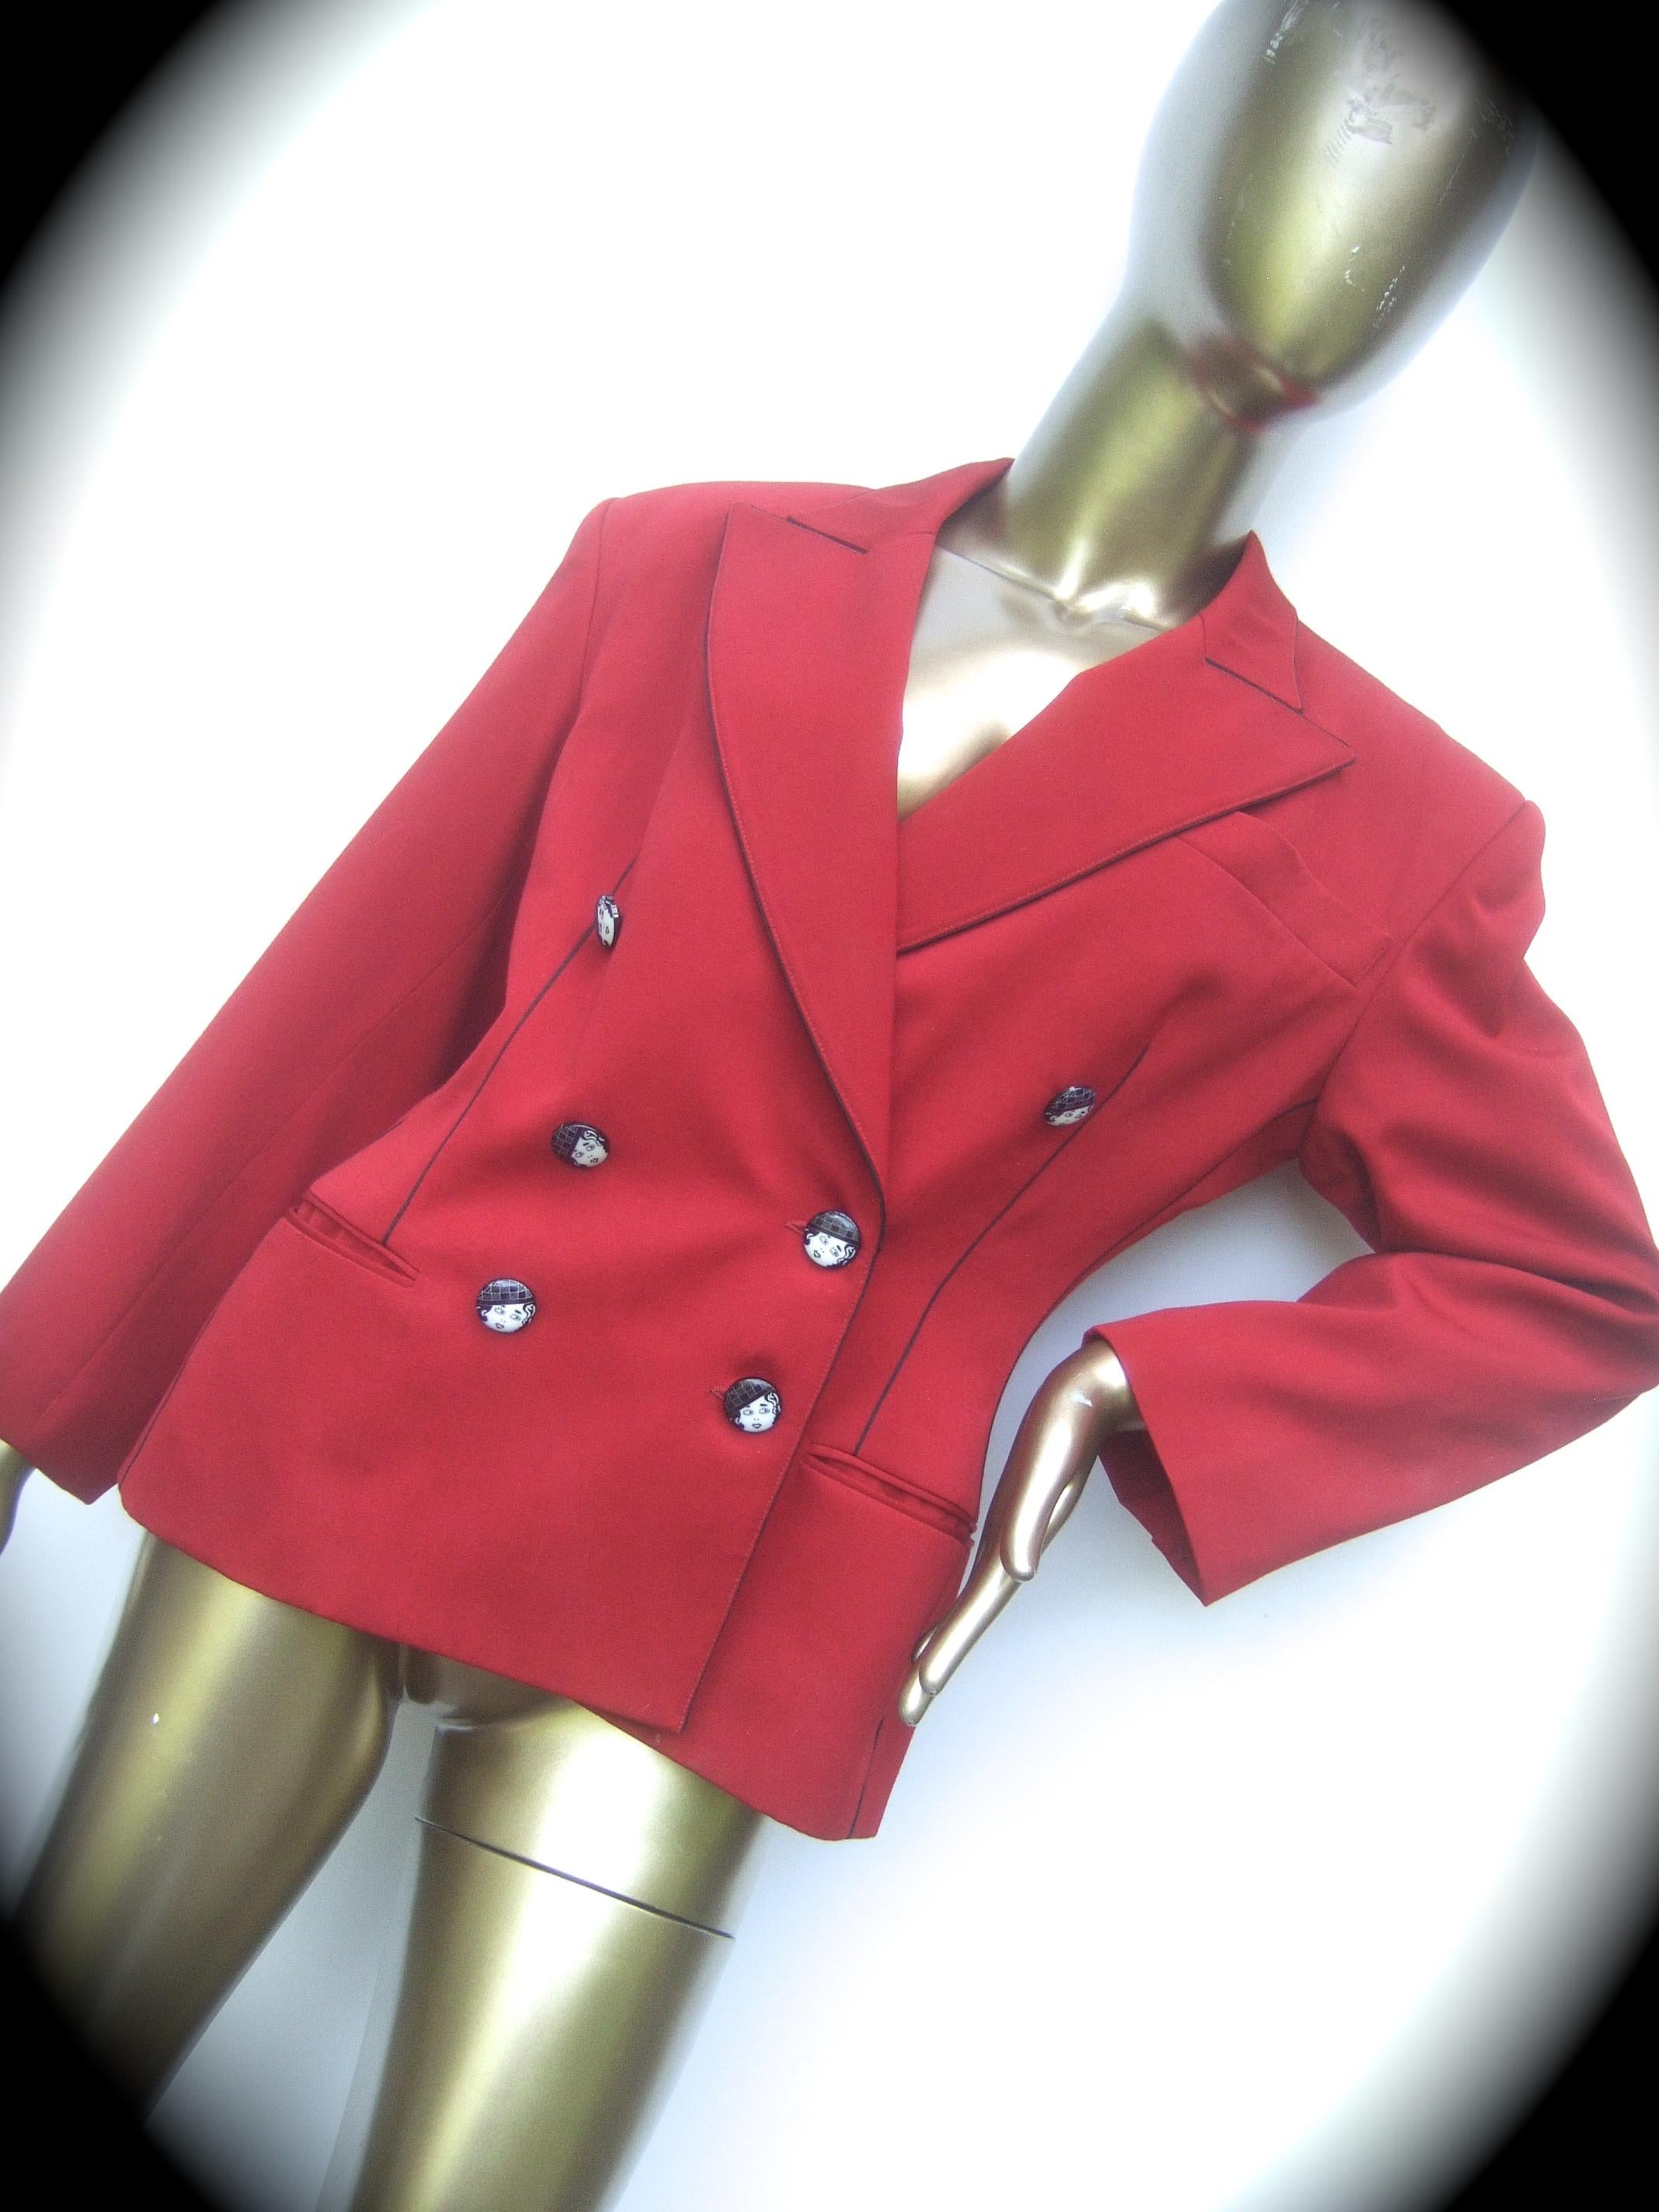 Lolita Lempicka Paris Red Wool Face Button Double-Breasted Blazer c 1980s For Sale 4